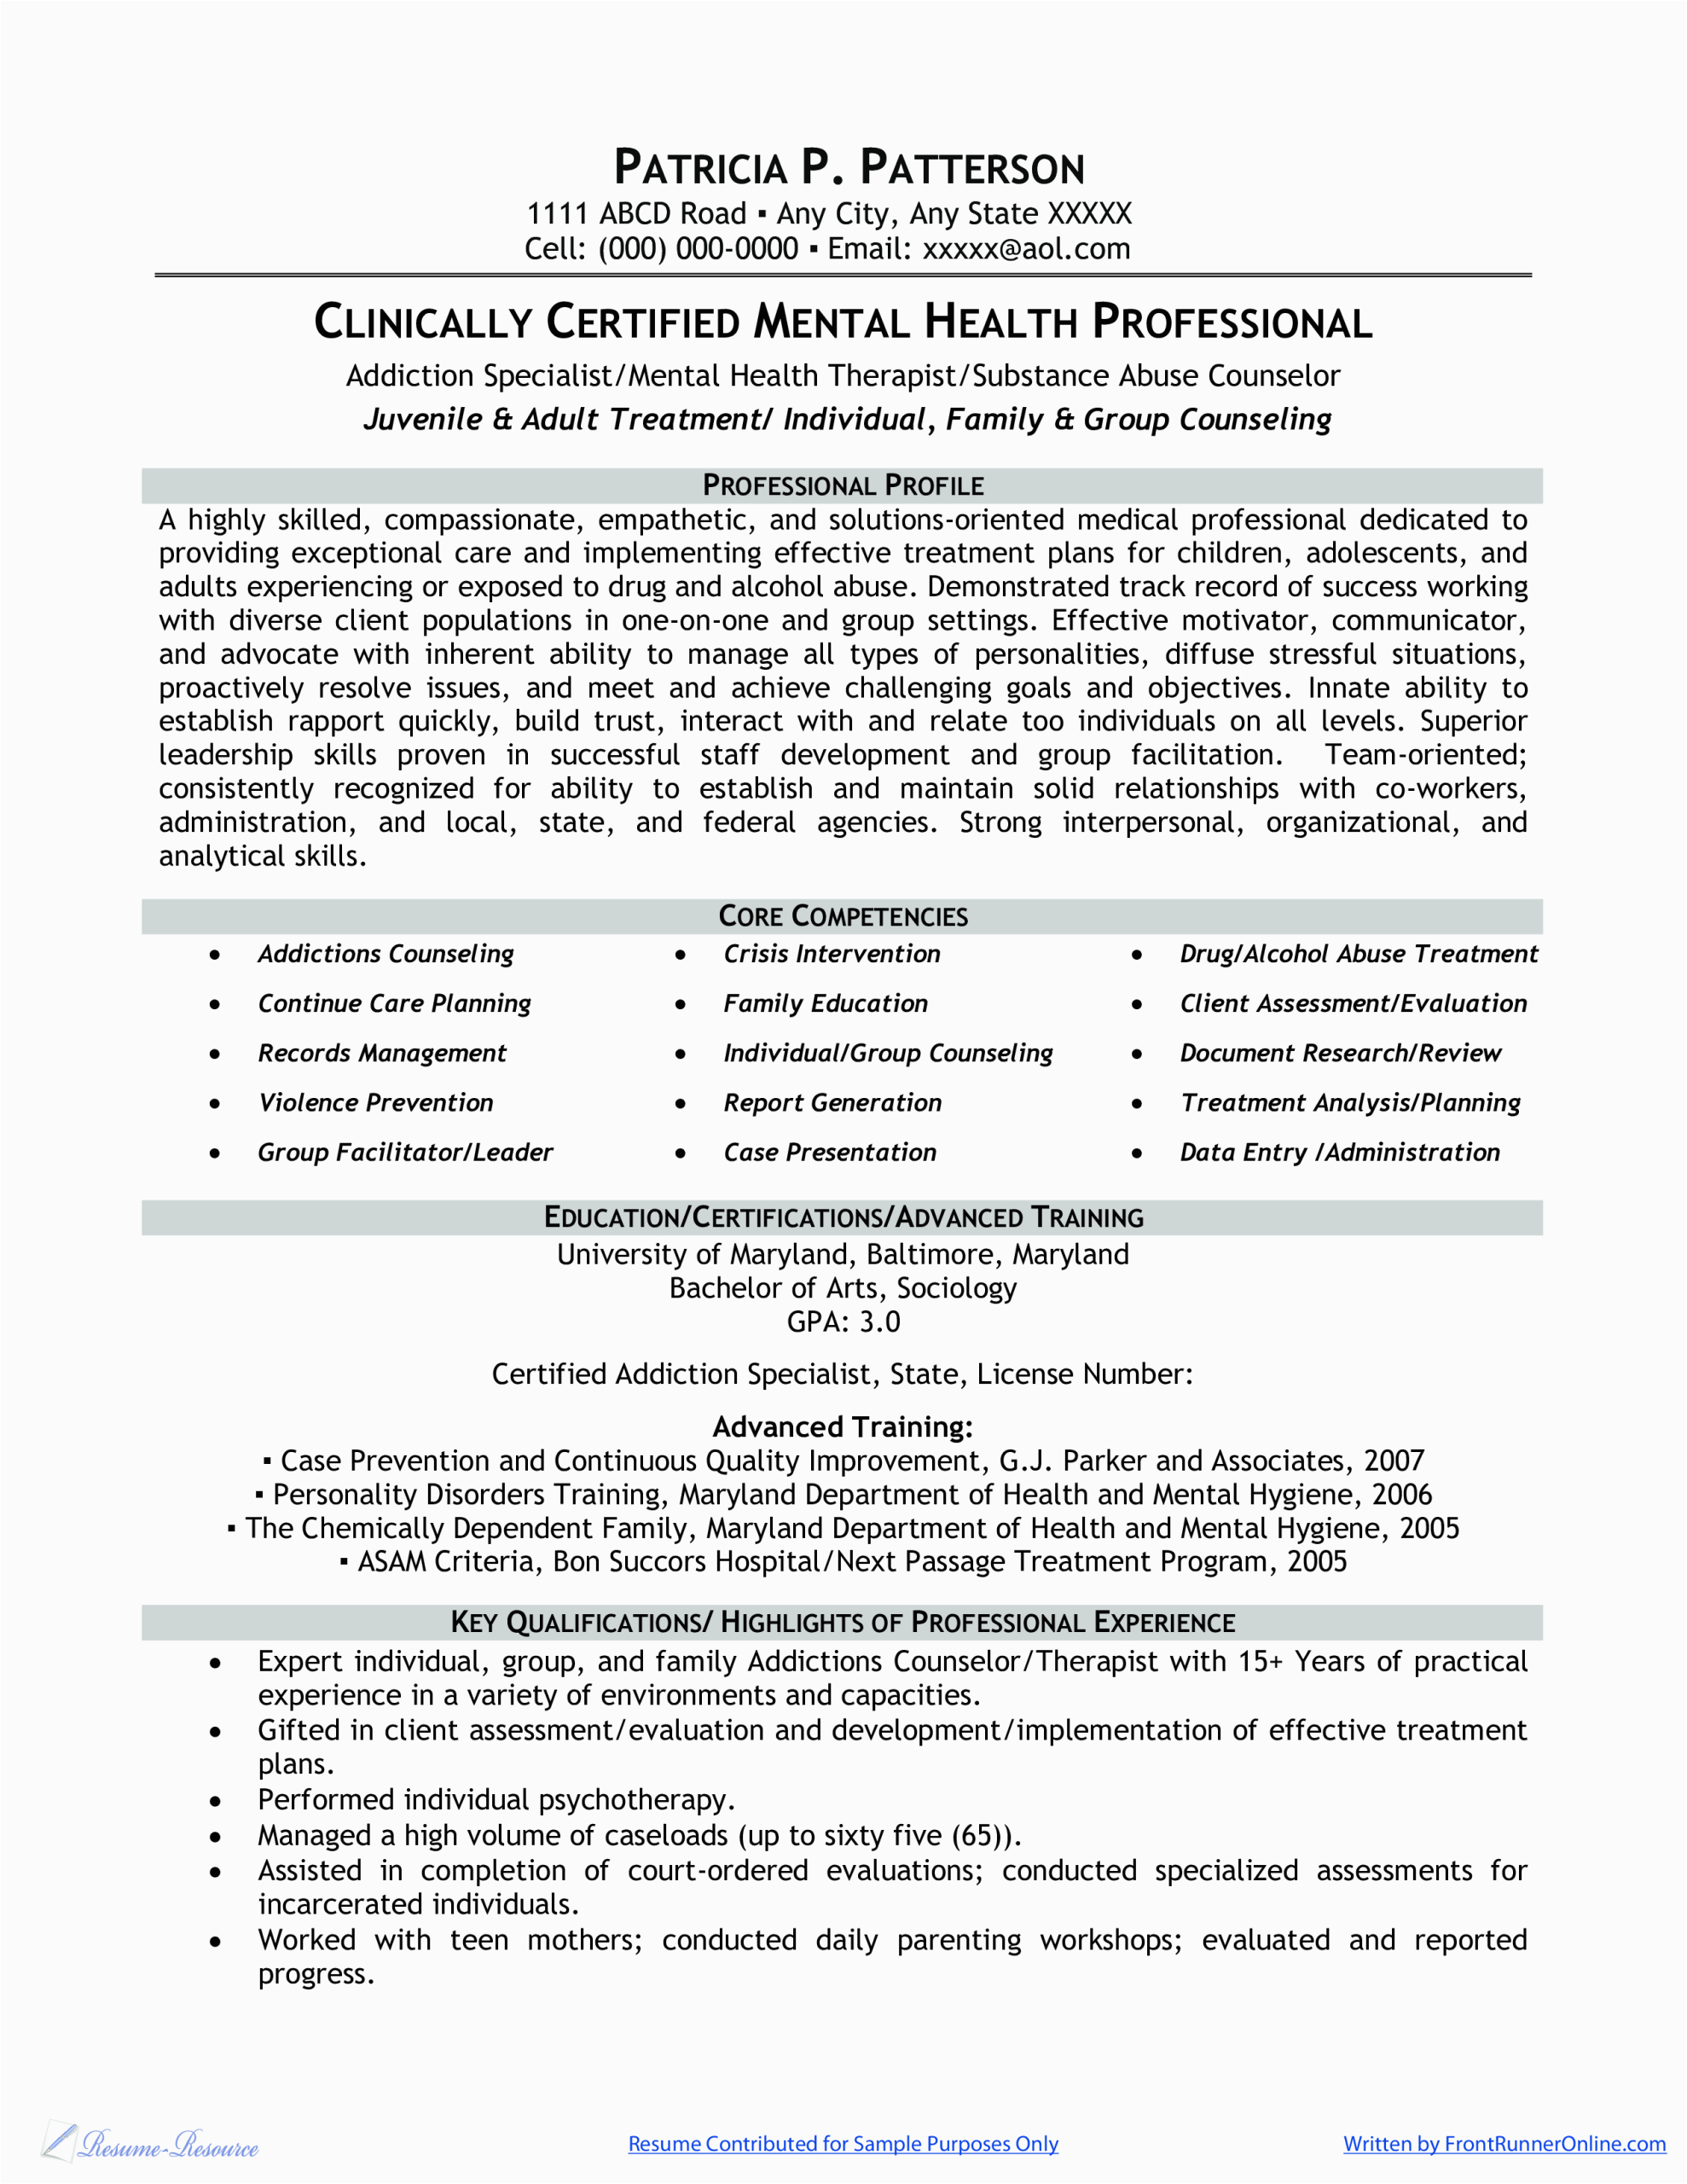 Sample Resumes for Mental Health Professionals Free Clinically Certified Mental Health Professional Resume